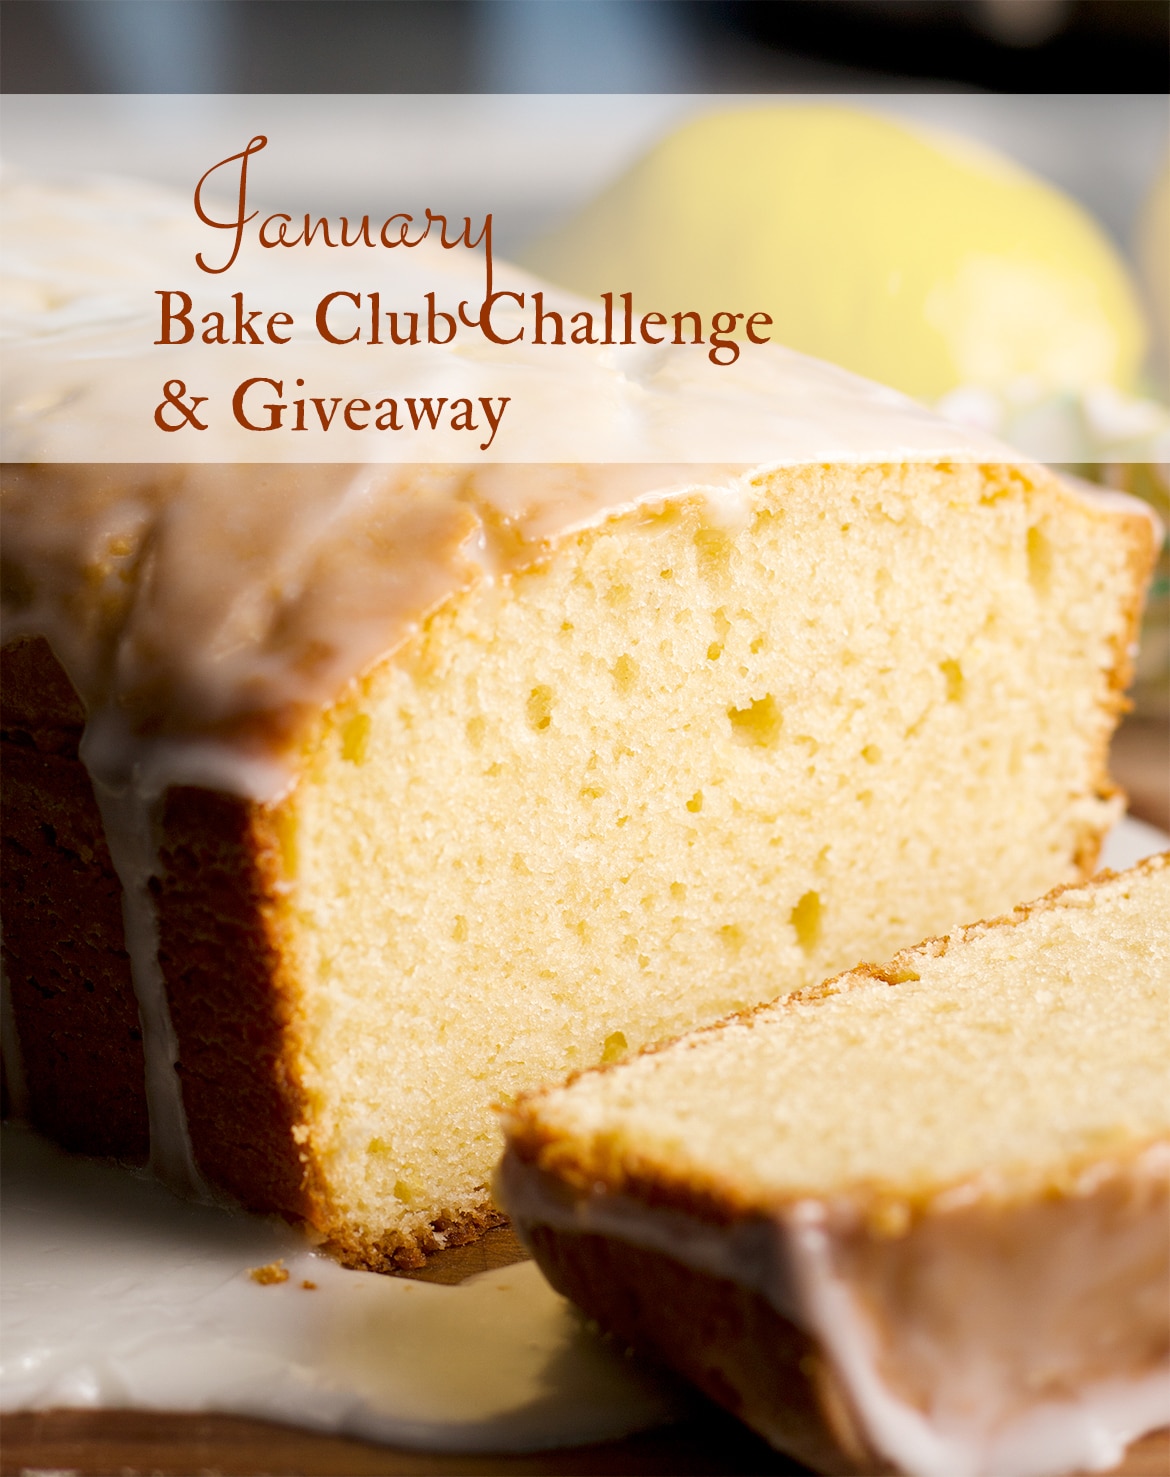 The January 2021 Bake Club Challenge Recipe is this Lemon Loaf Cake